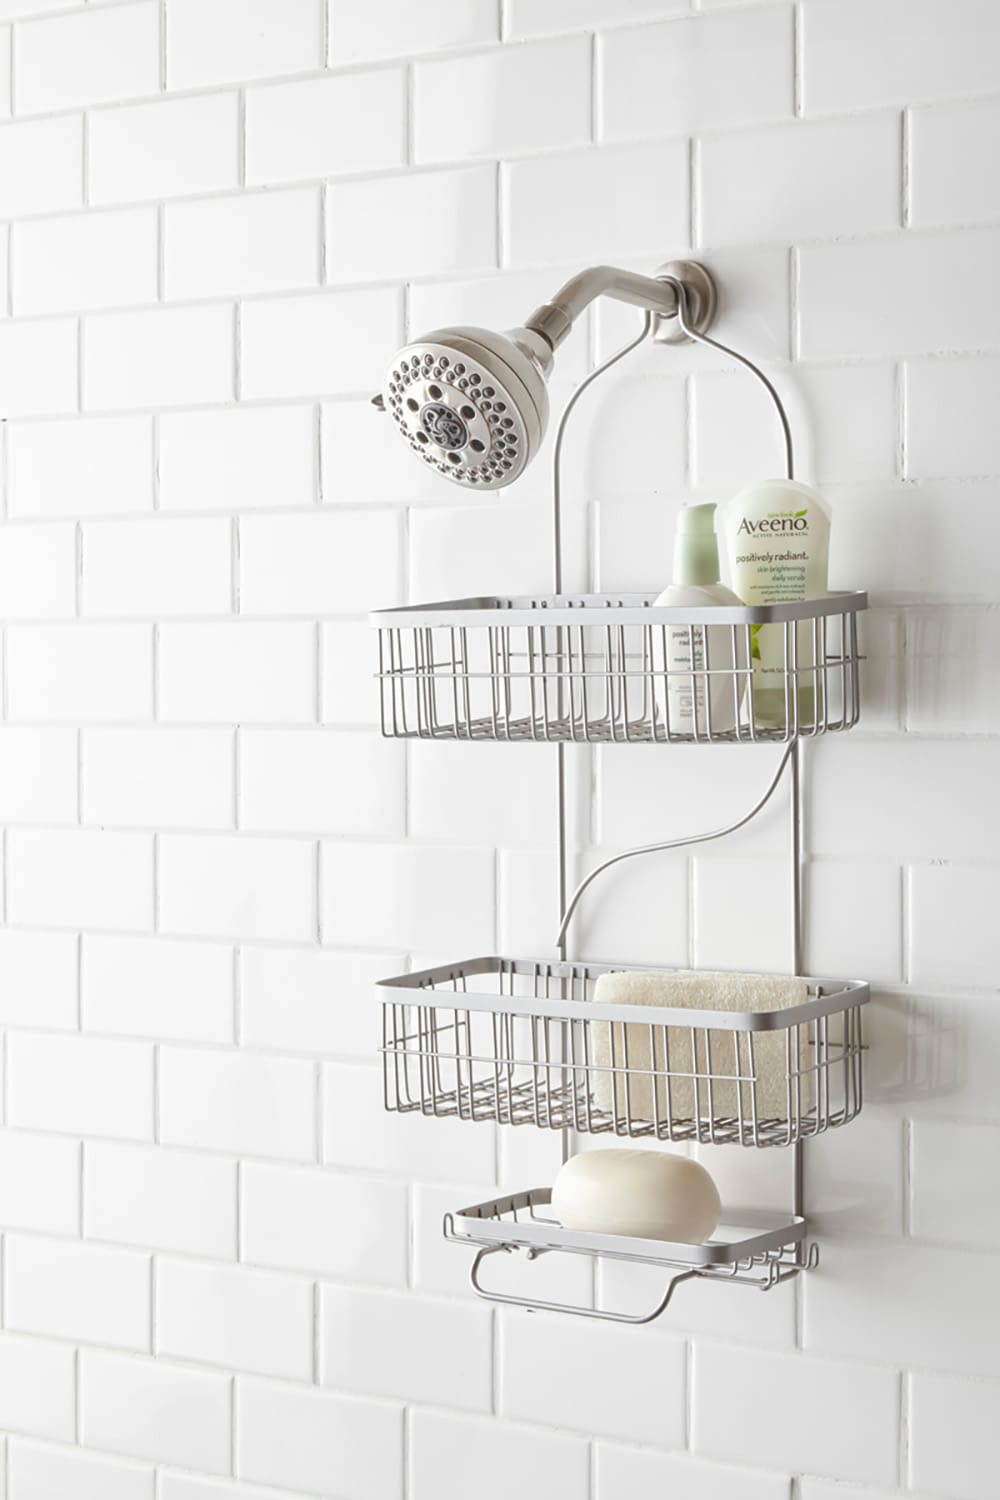 Style Selections Satin Nickel Steel 2-Shelf Hanging Shower Caddy 12-in x  5.1-in x 25.5-in in the Bathtub & Shower Caddies department at